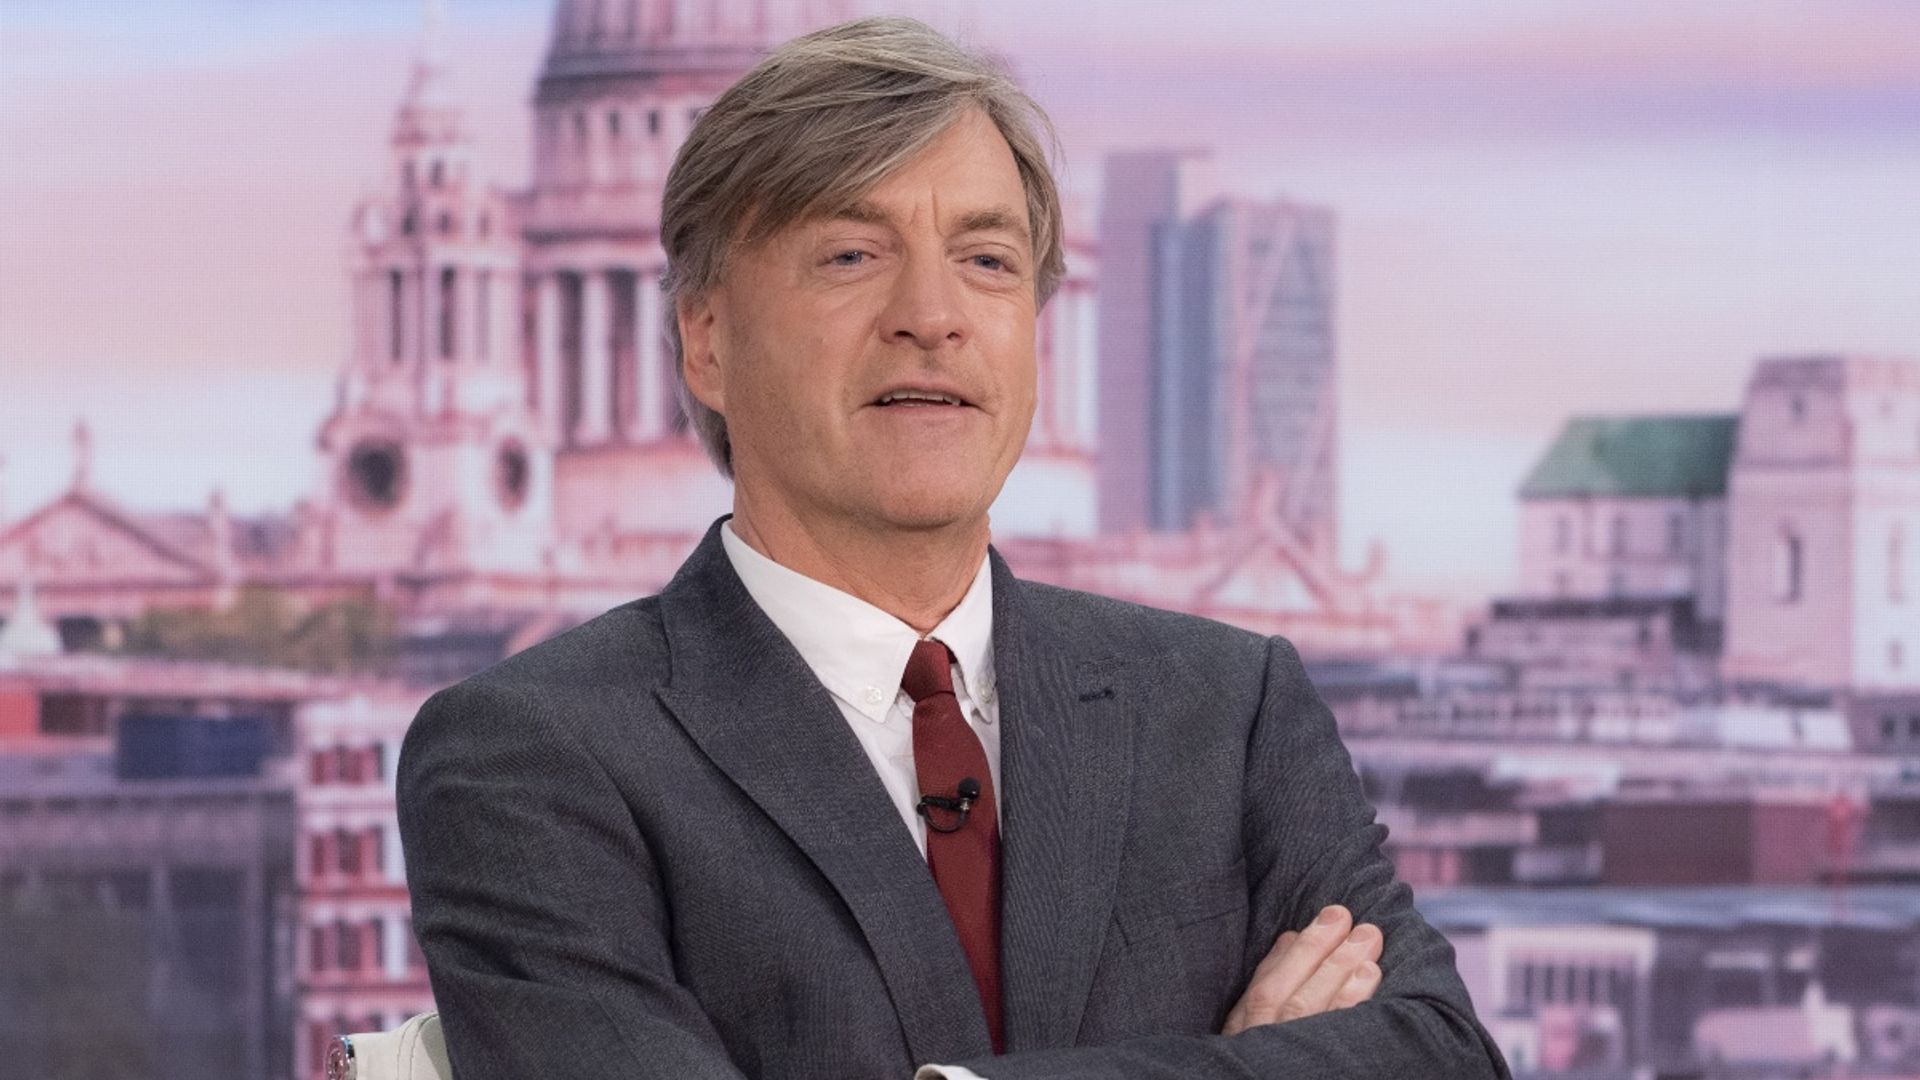 Richard Madeley reveals ‘freak accident’ that forced him off GMB as he denies sacking report